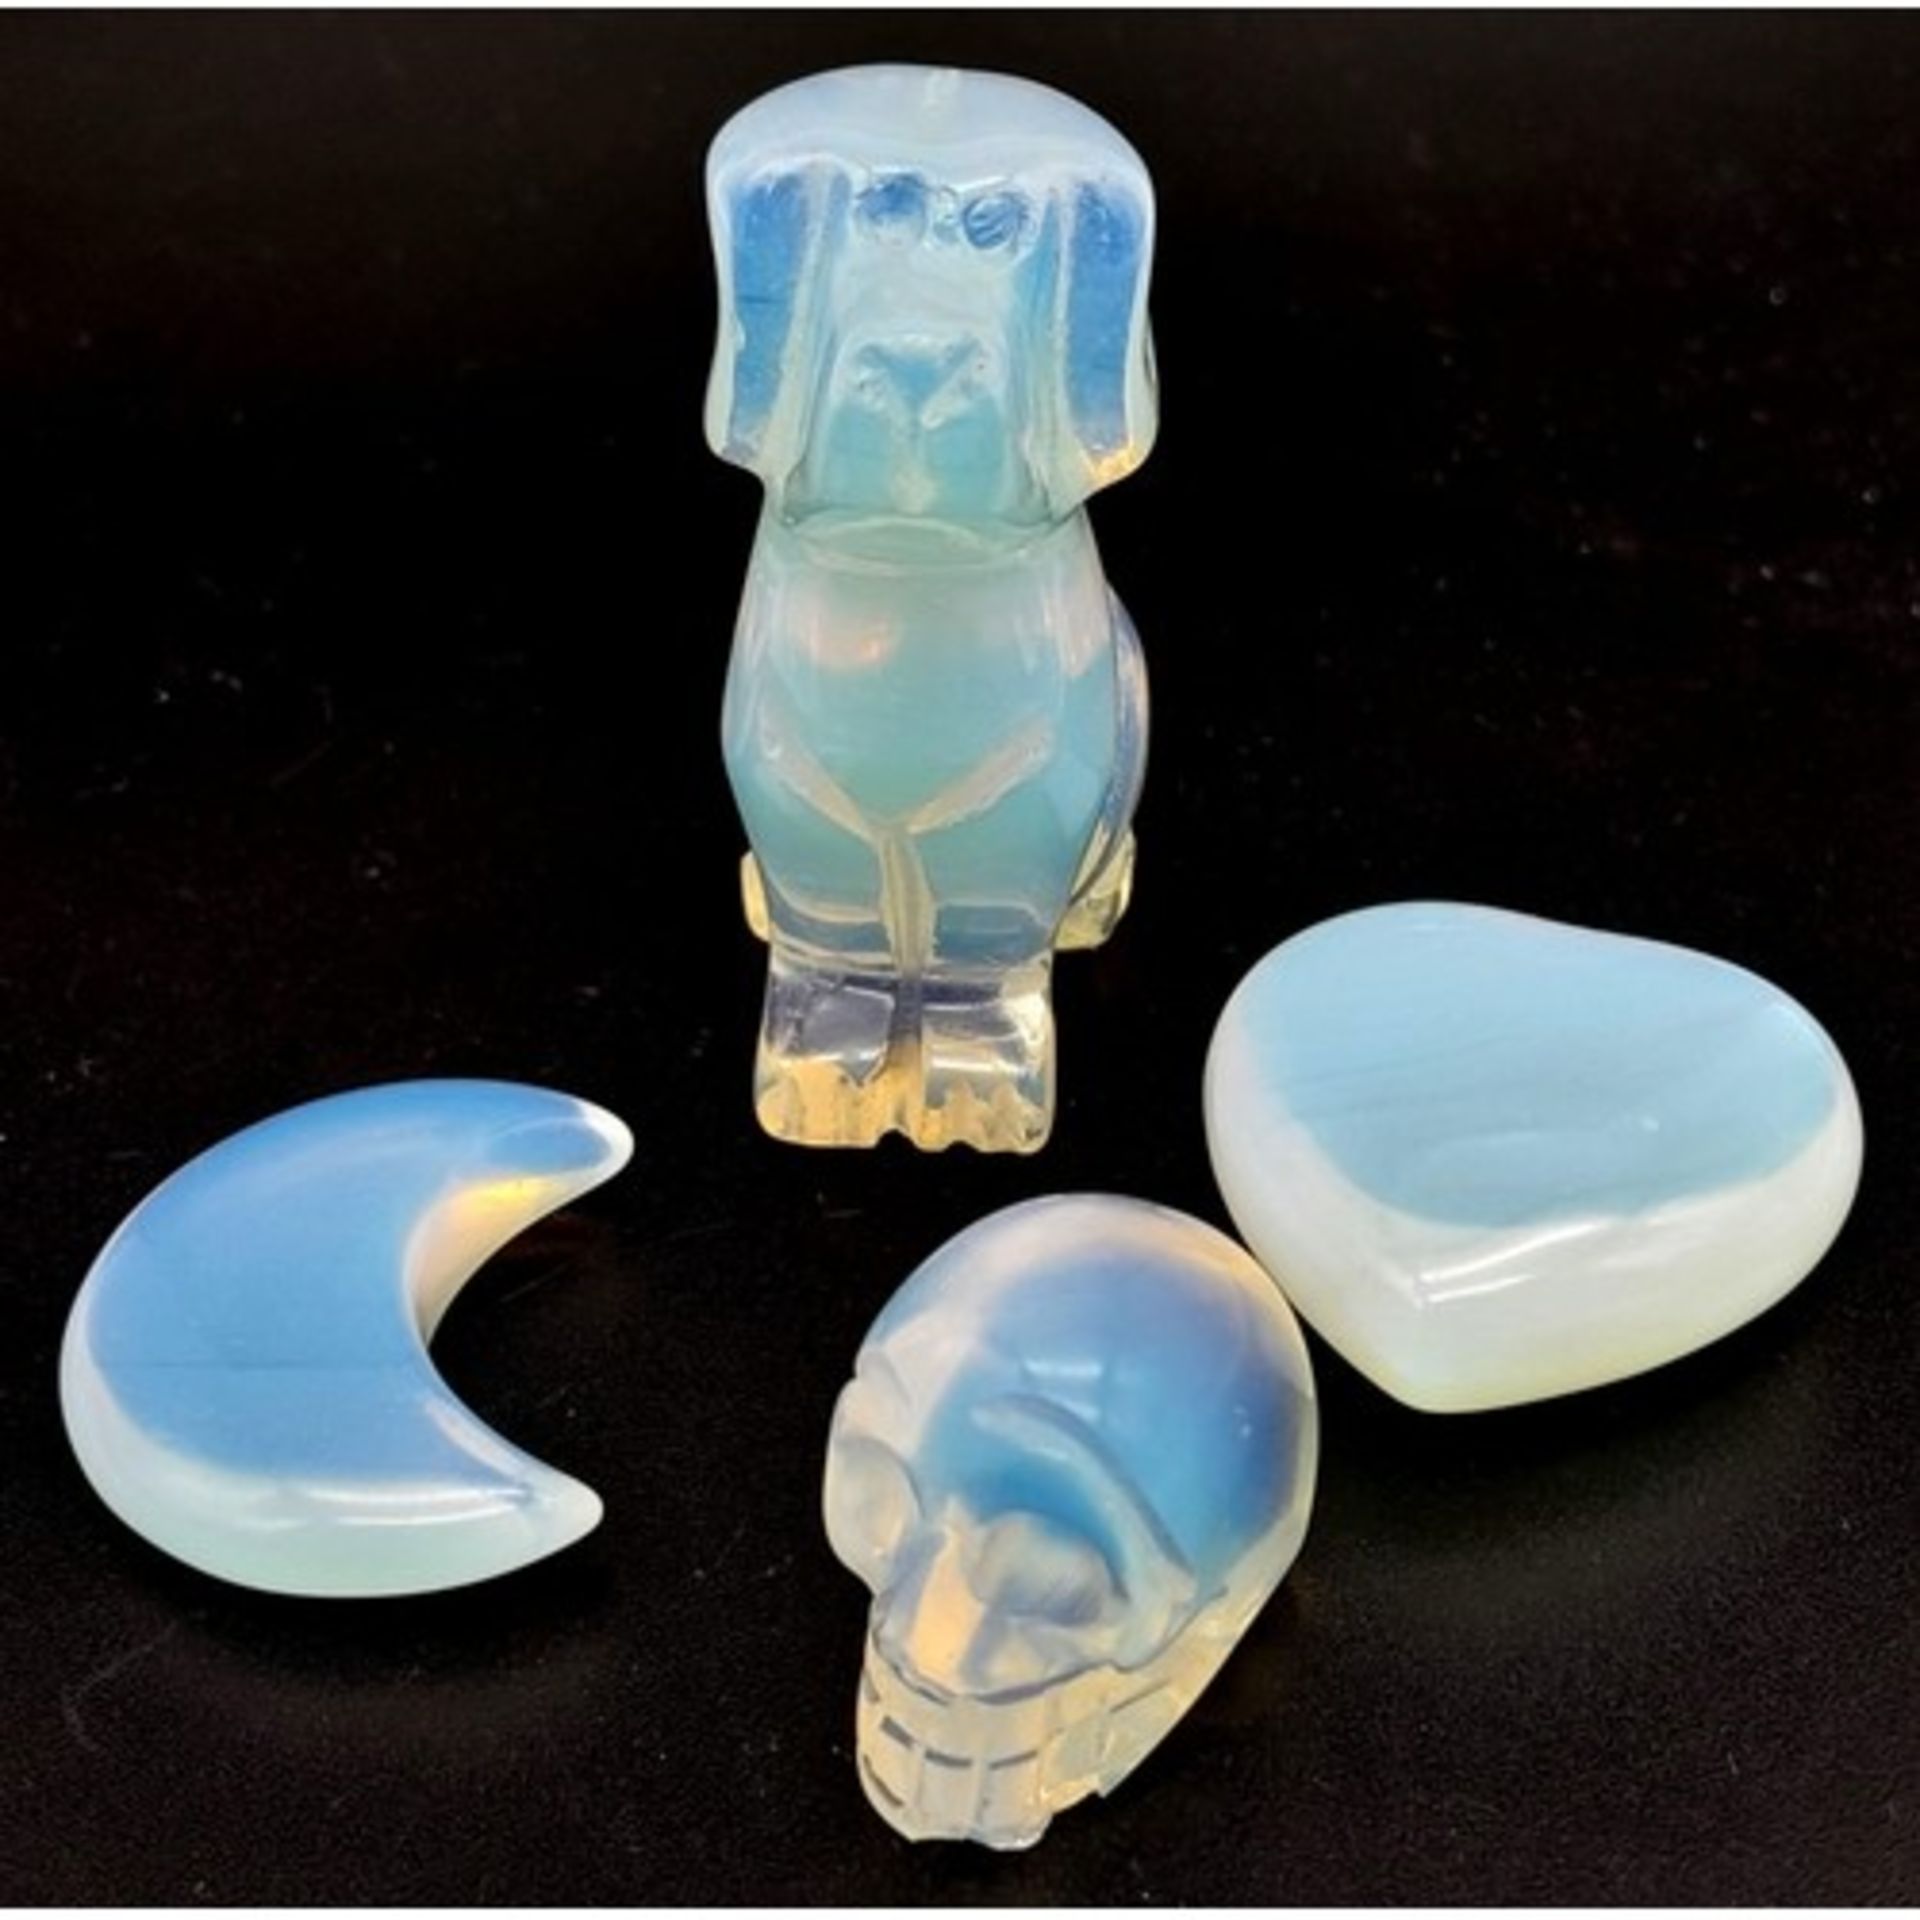 Parcel of 4 Opalite Figurines Featuring a Dog, Skull, Heart & Moon.